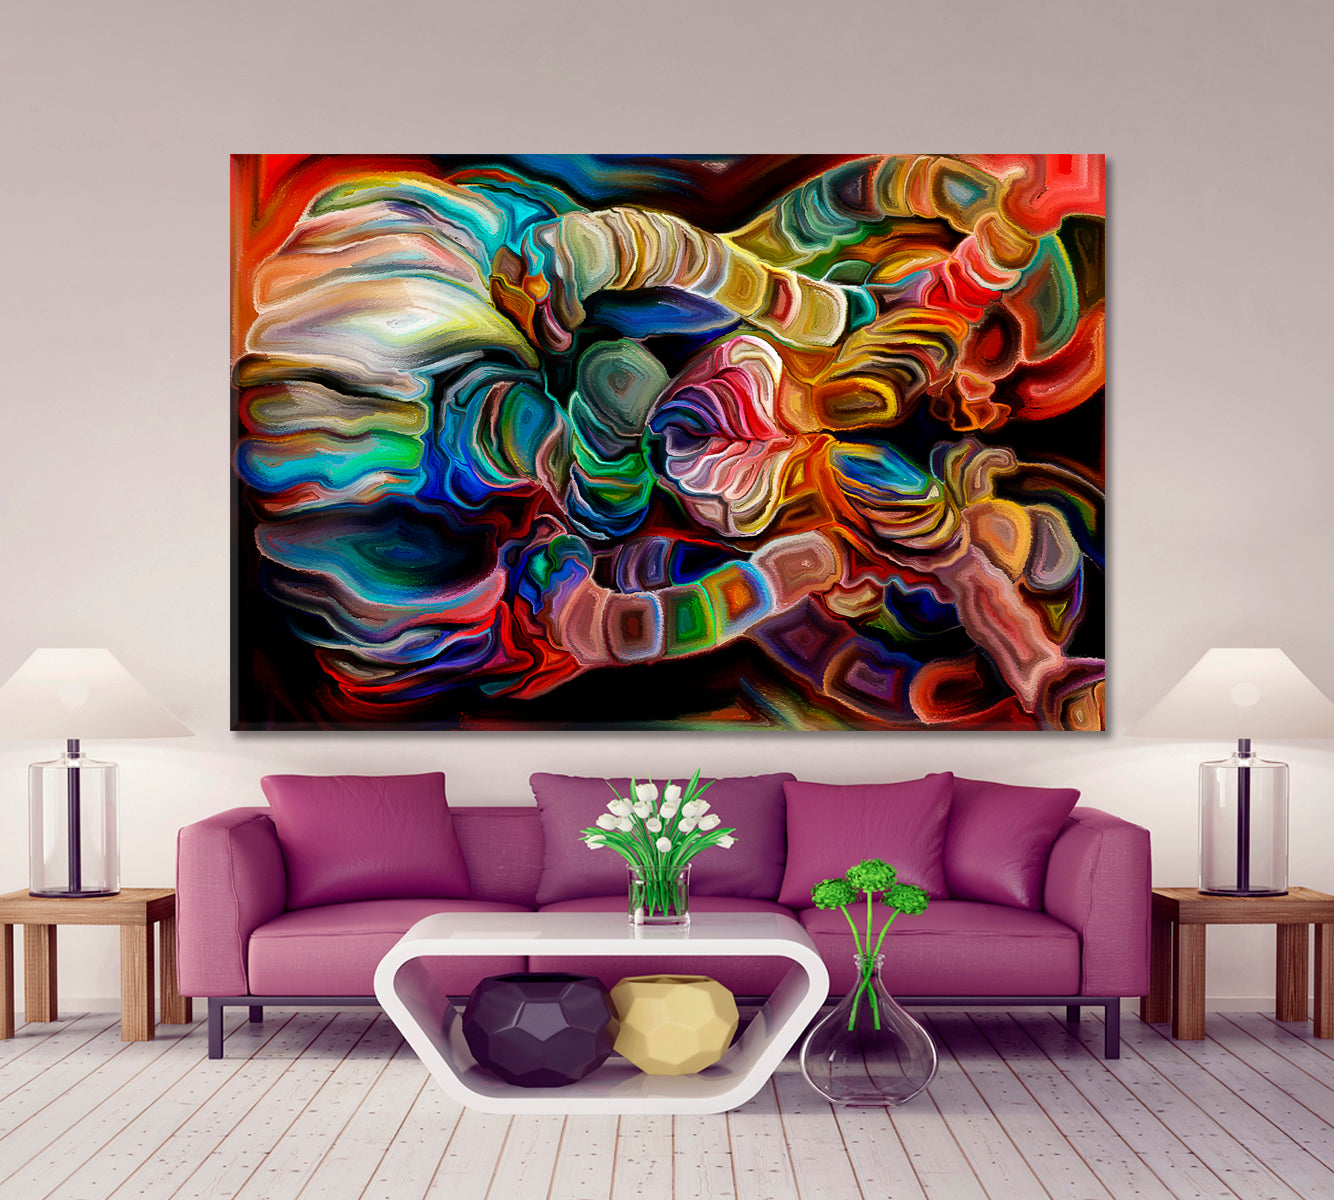 COLORS MOTION Abstract Pictorial and Artistic Effects Art Abstract Art Print Artesty 1 panel 24" x 16" 